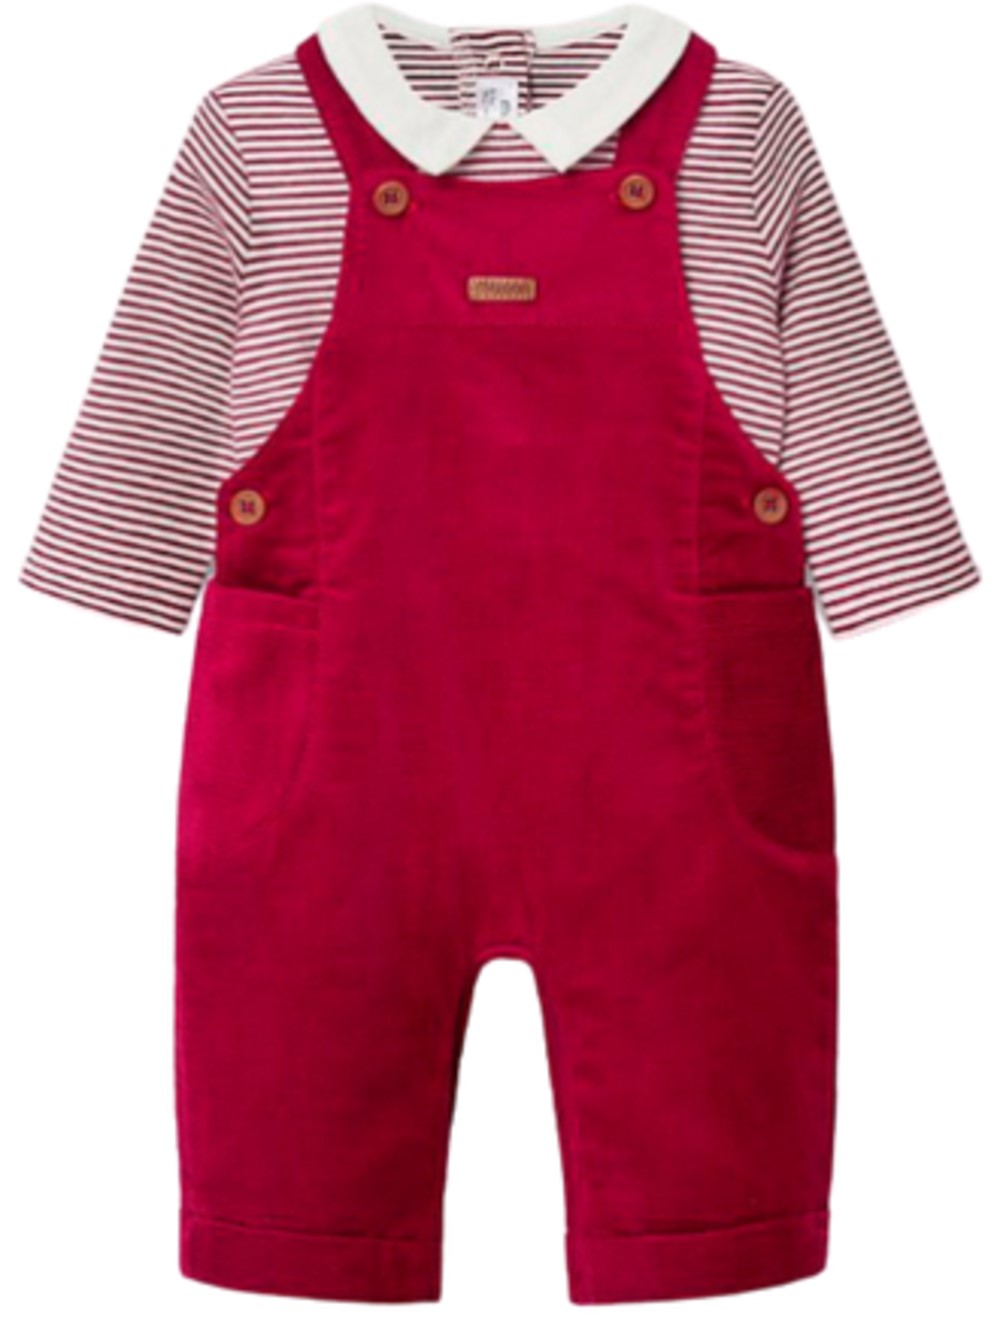 MAYORAL 2638 BABY BOYS' RED AND WHITE MICRO-CORDUROY OVERALL PANTS SET 